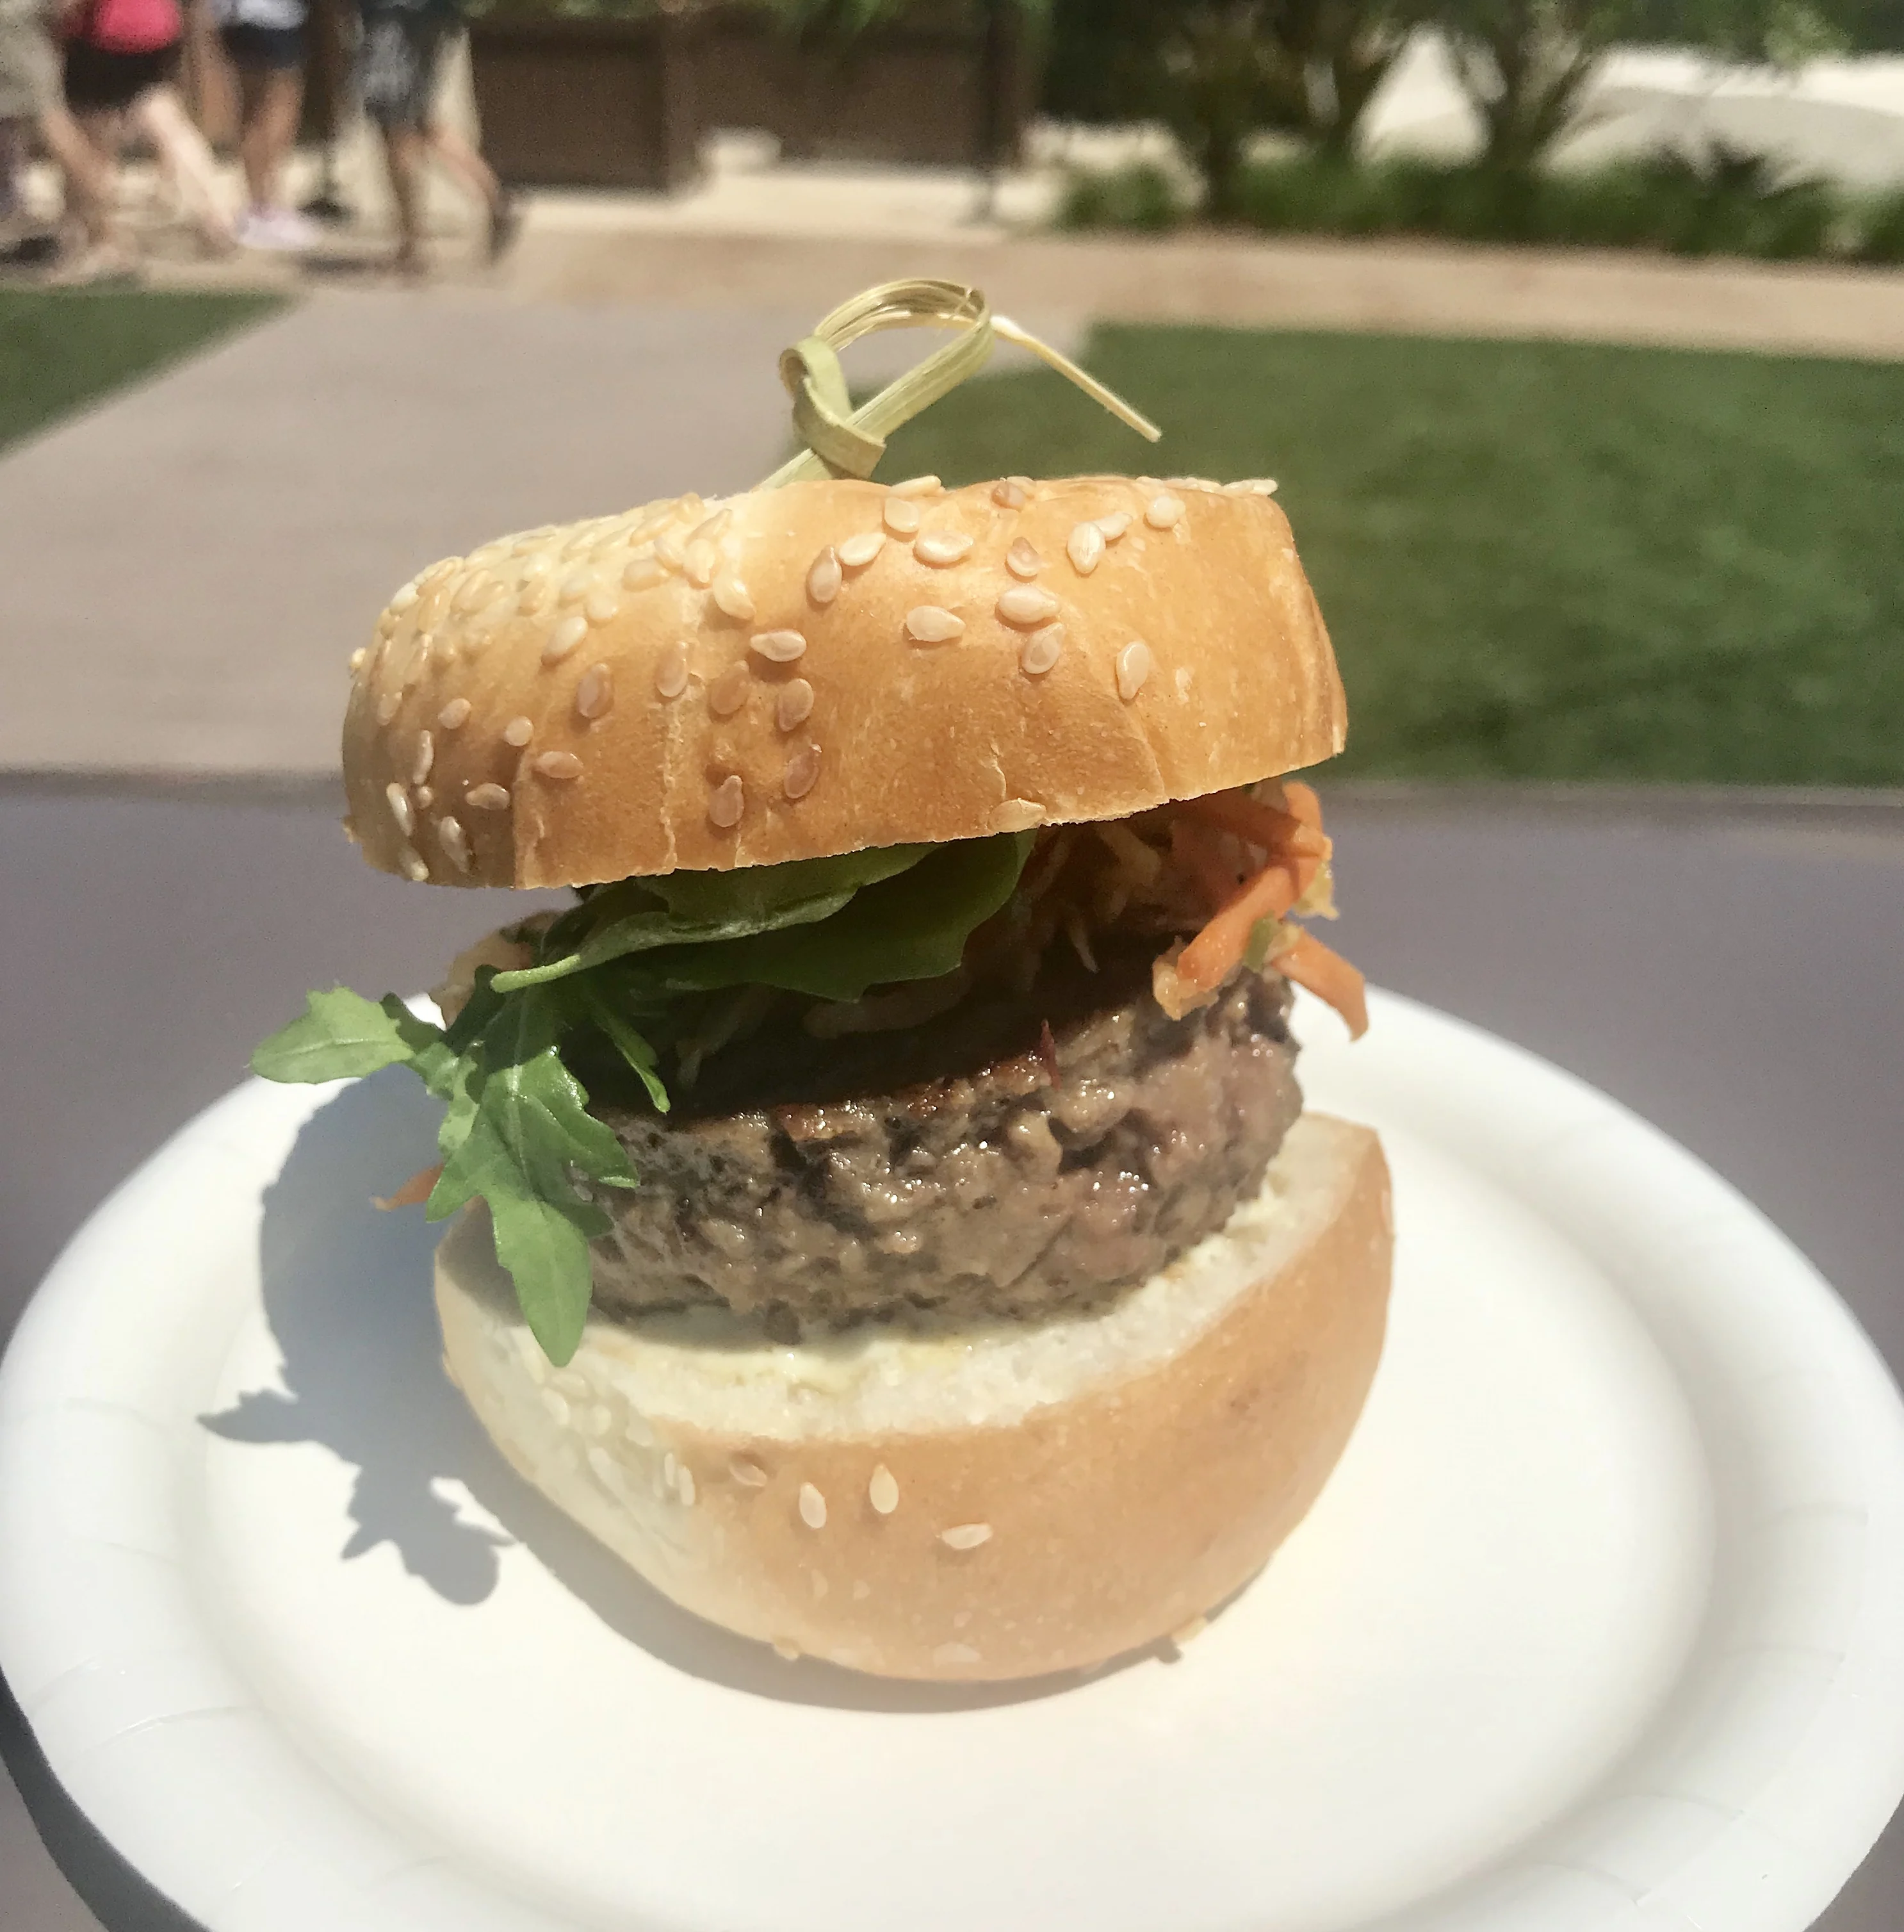 Impossible Burger with wasabi cream and slaw at epcot food and wine festival